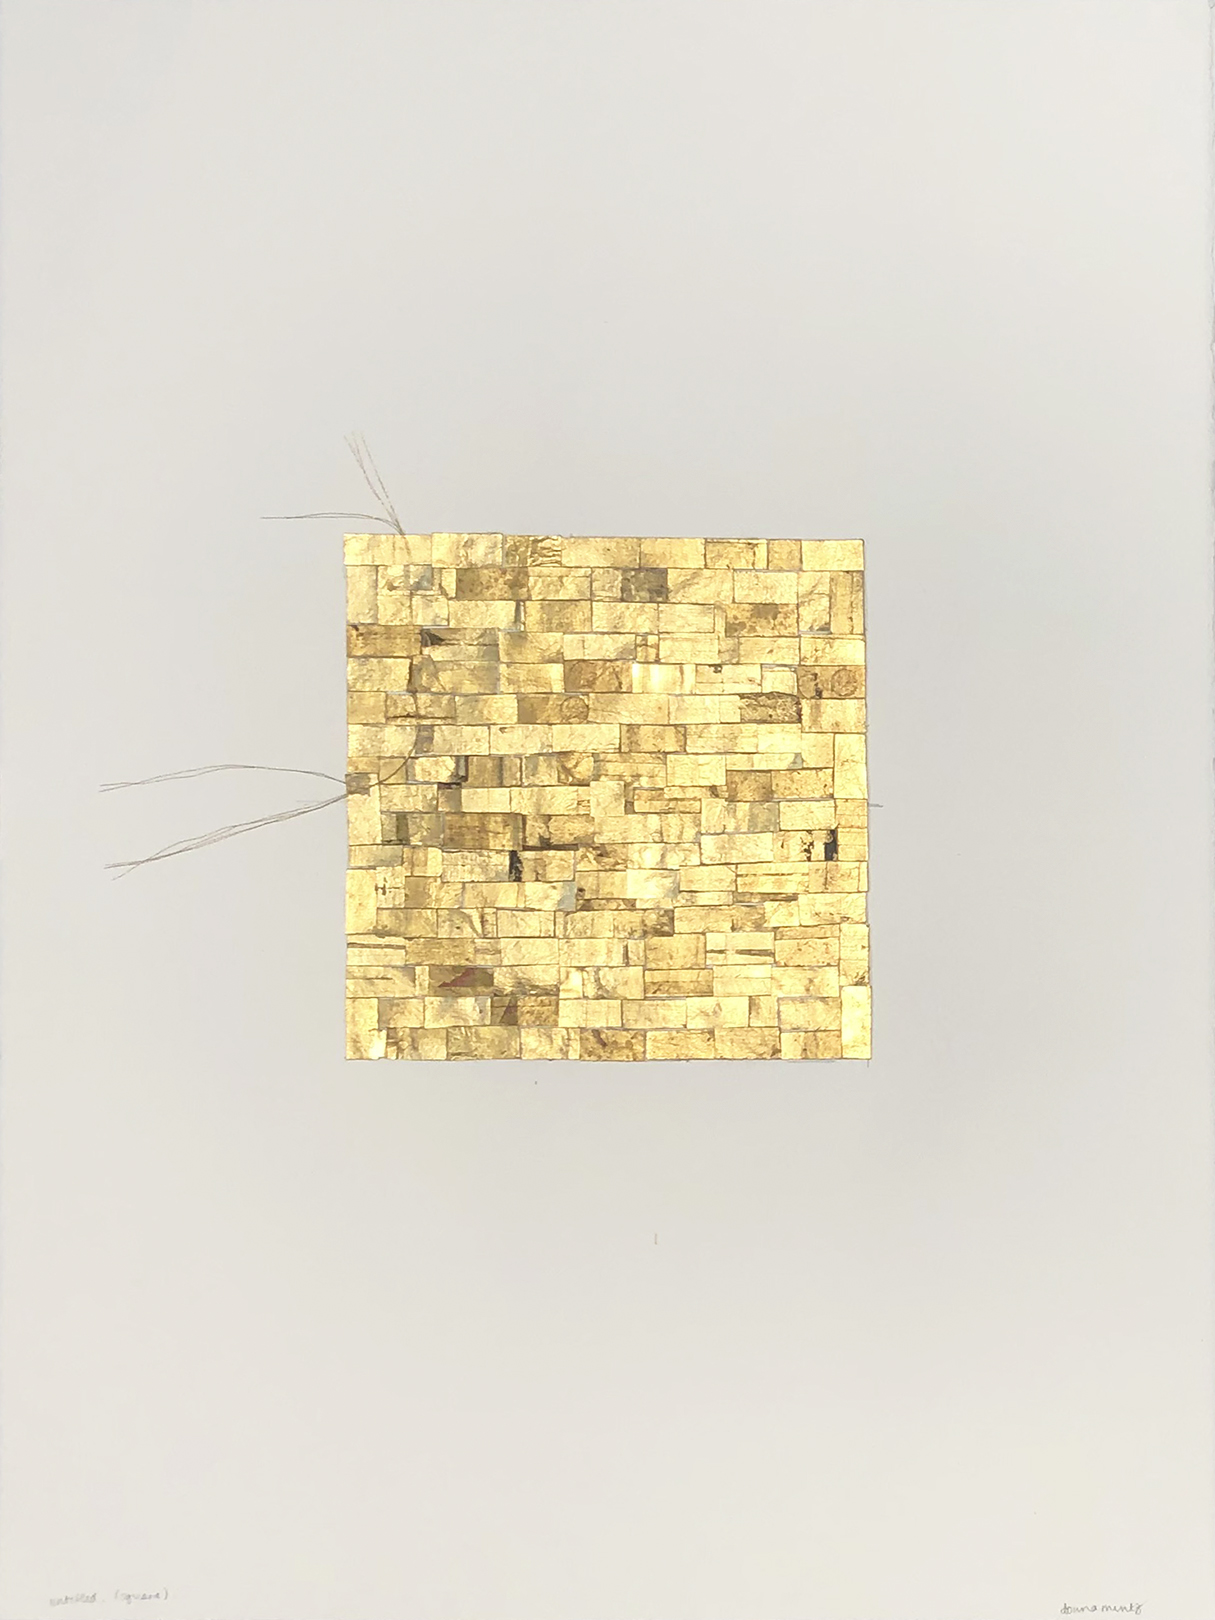    Untitled (Square)  , 2019  Collage, composition gold leaf, mineral pigment, 23K gold thread  30 x 22.5 in. 